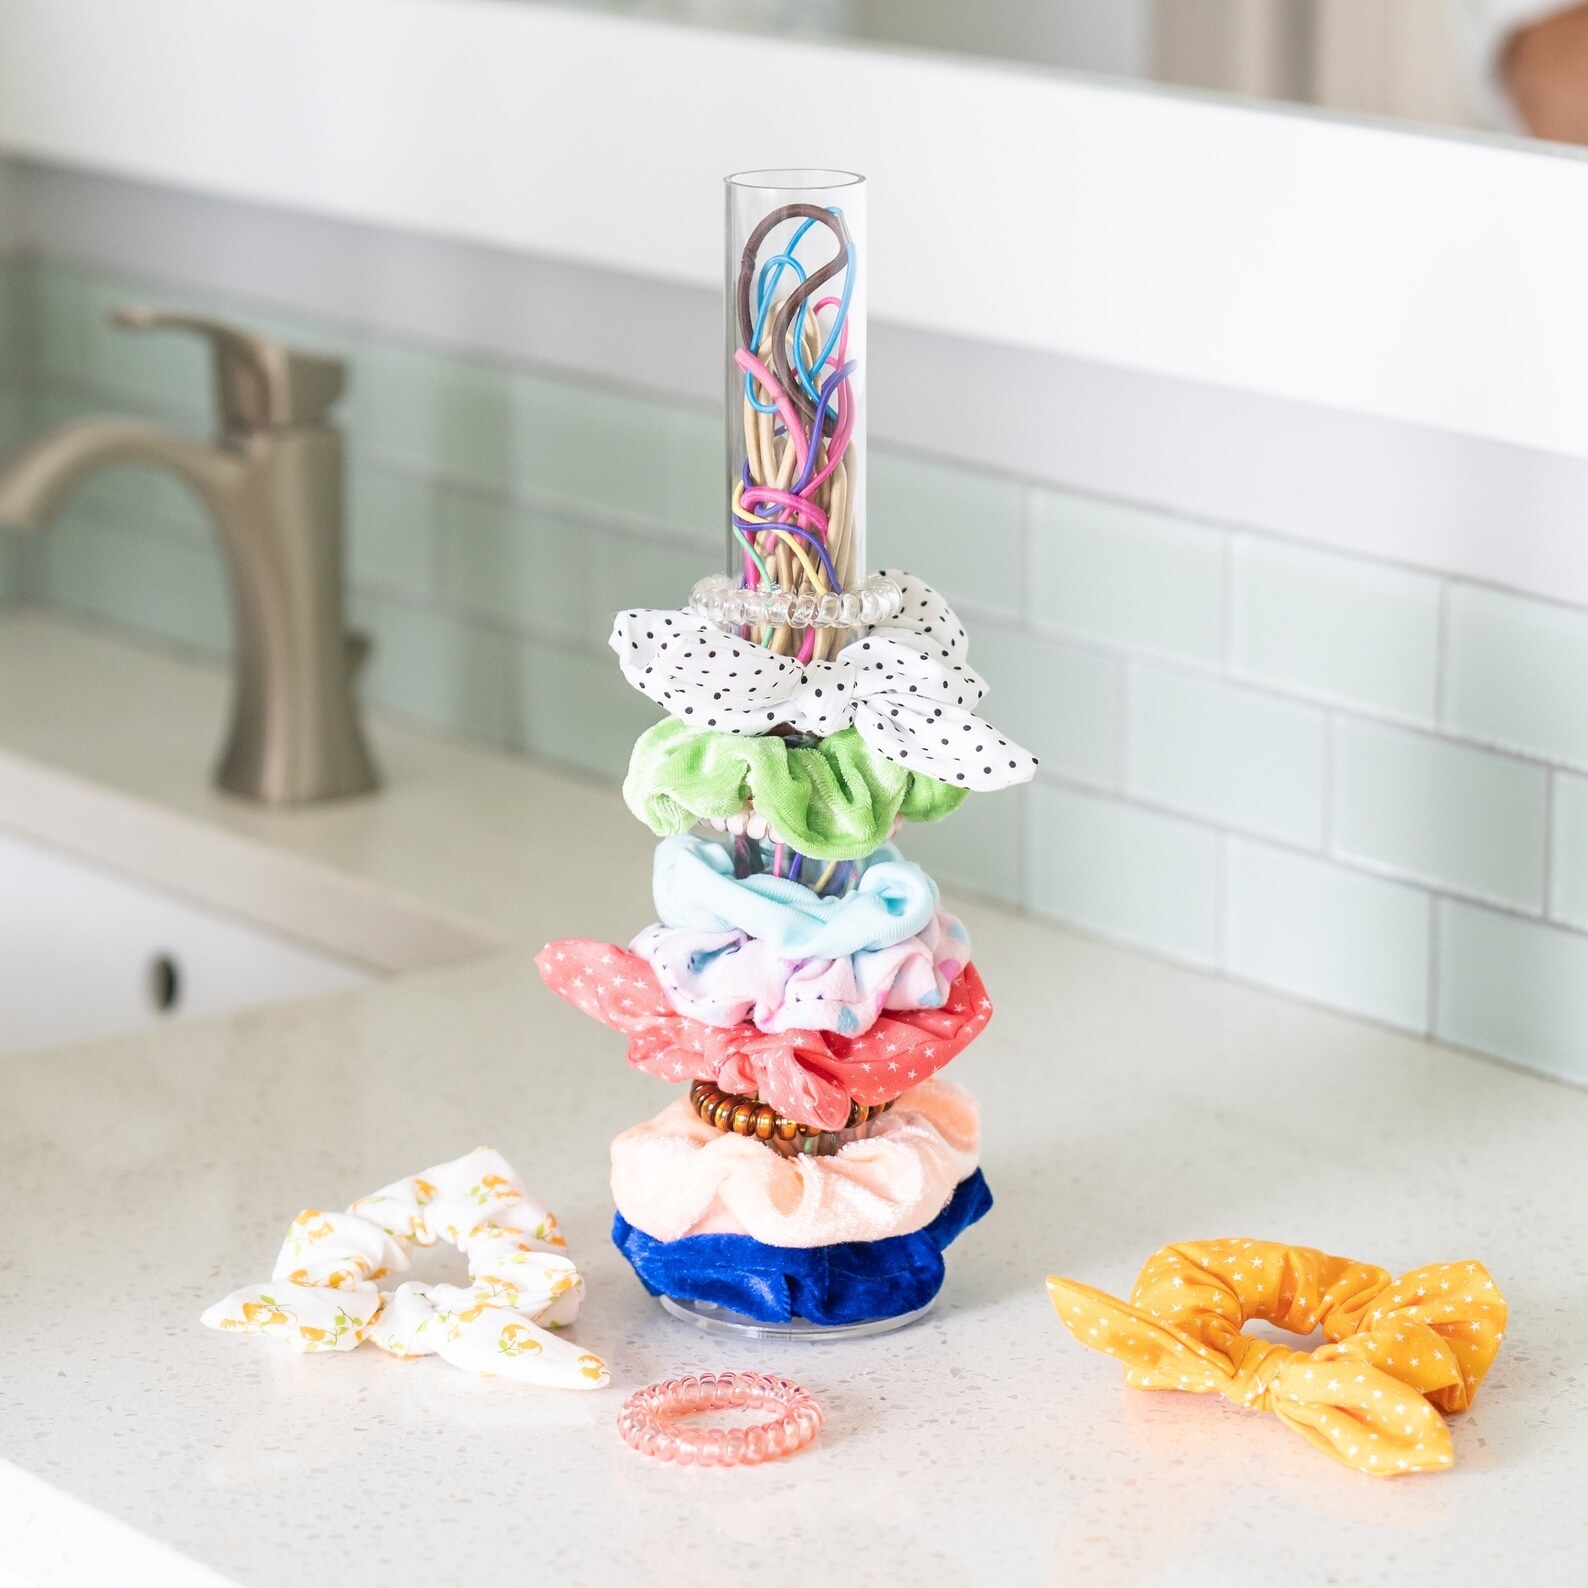 A variety of scrunchies placed on the holder